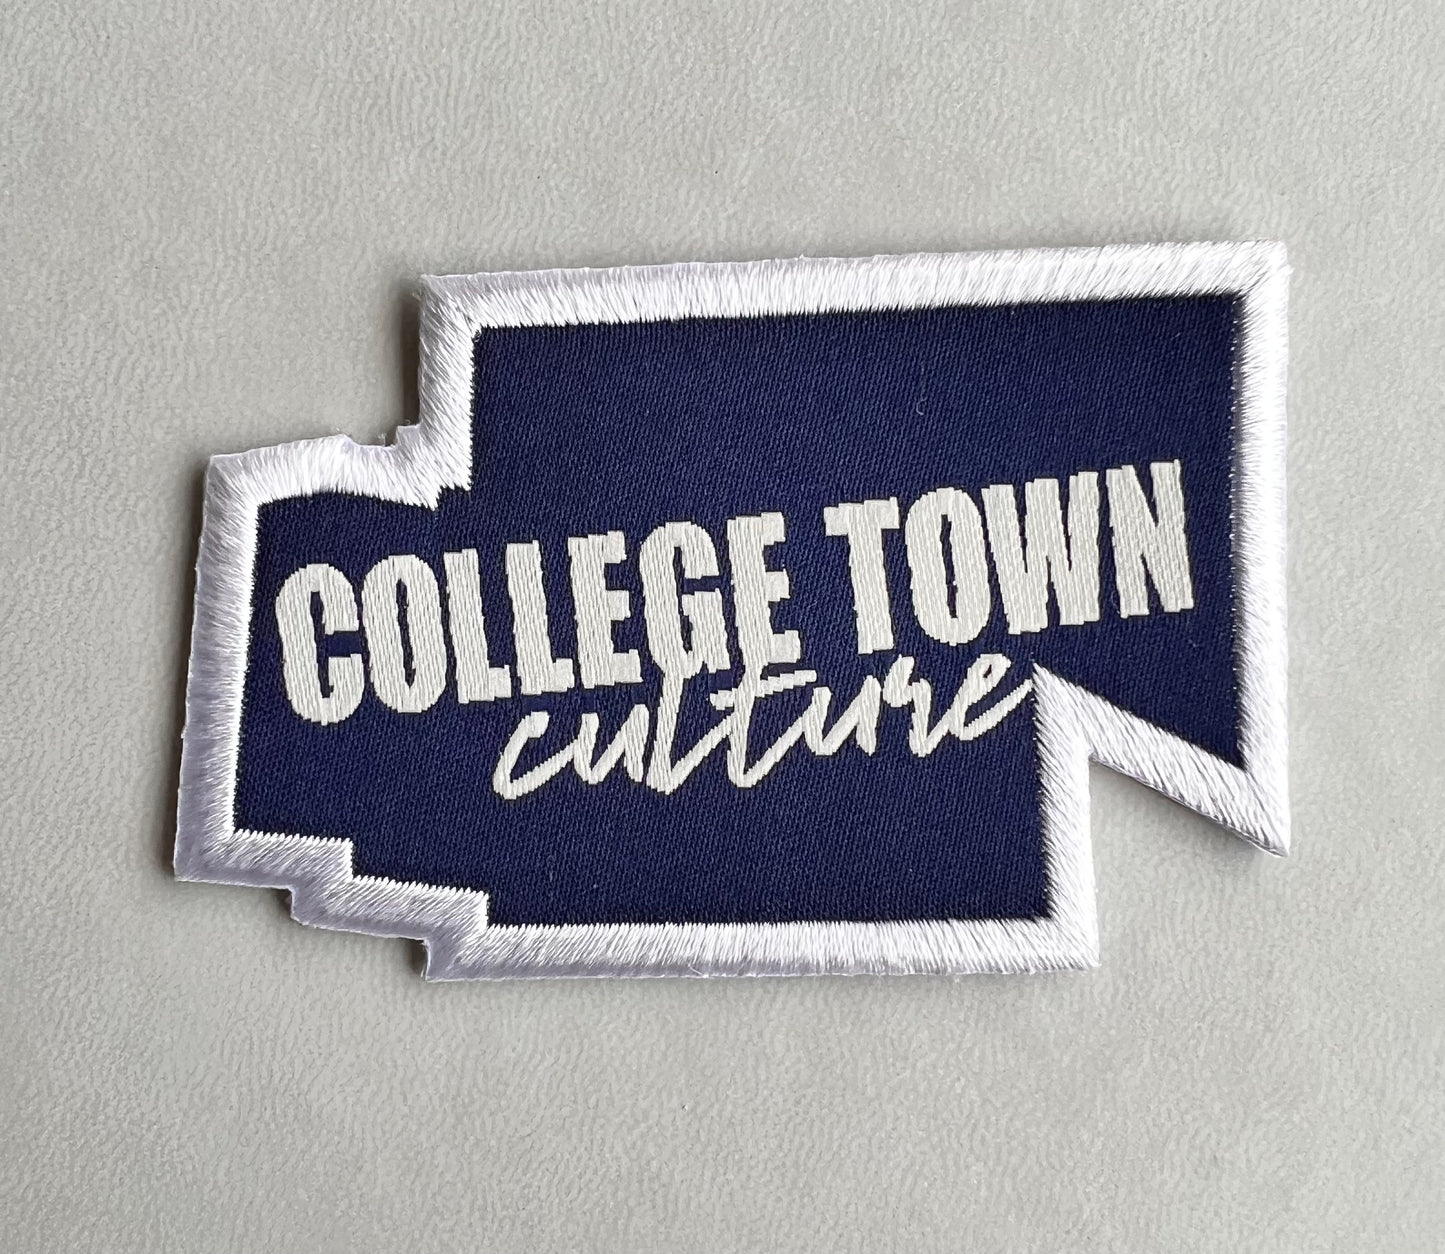 College Town Culture "814" Patch